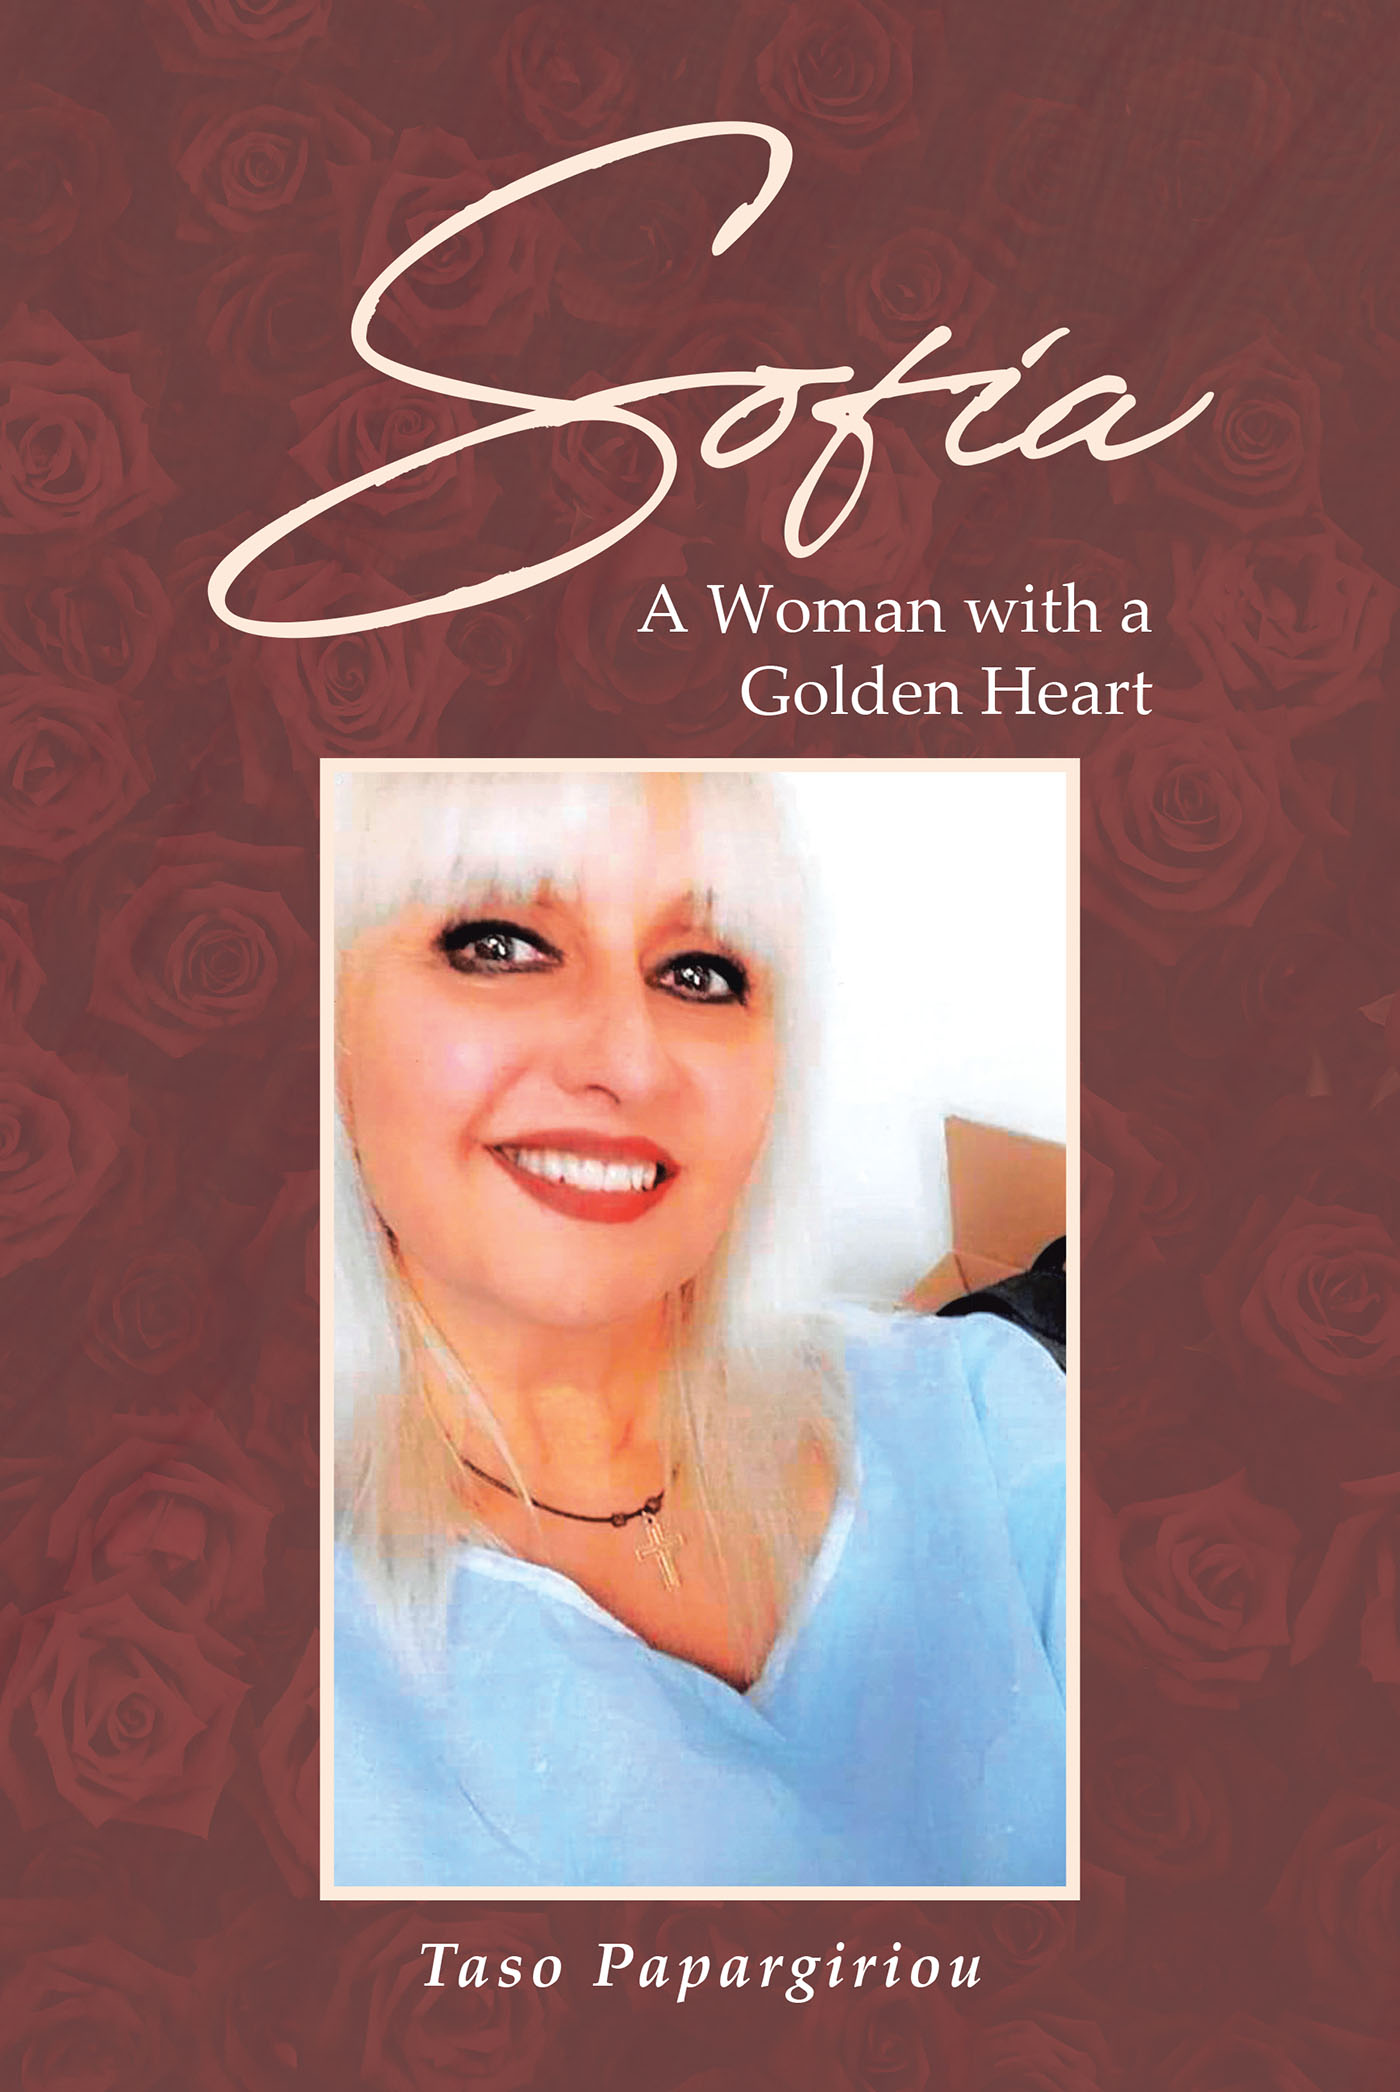 Author Taso Papargiriou’s New Book, "Sofia: A Woman with a Golden Heart," is a Profound Journey the Explores the Author's Incredible Love for the Woman Who Saved His Soul